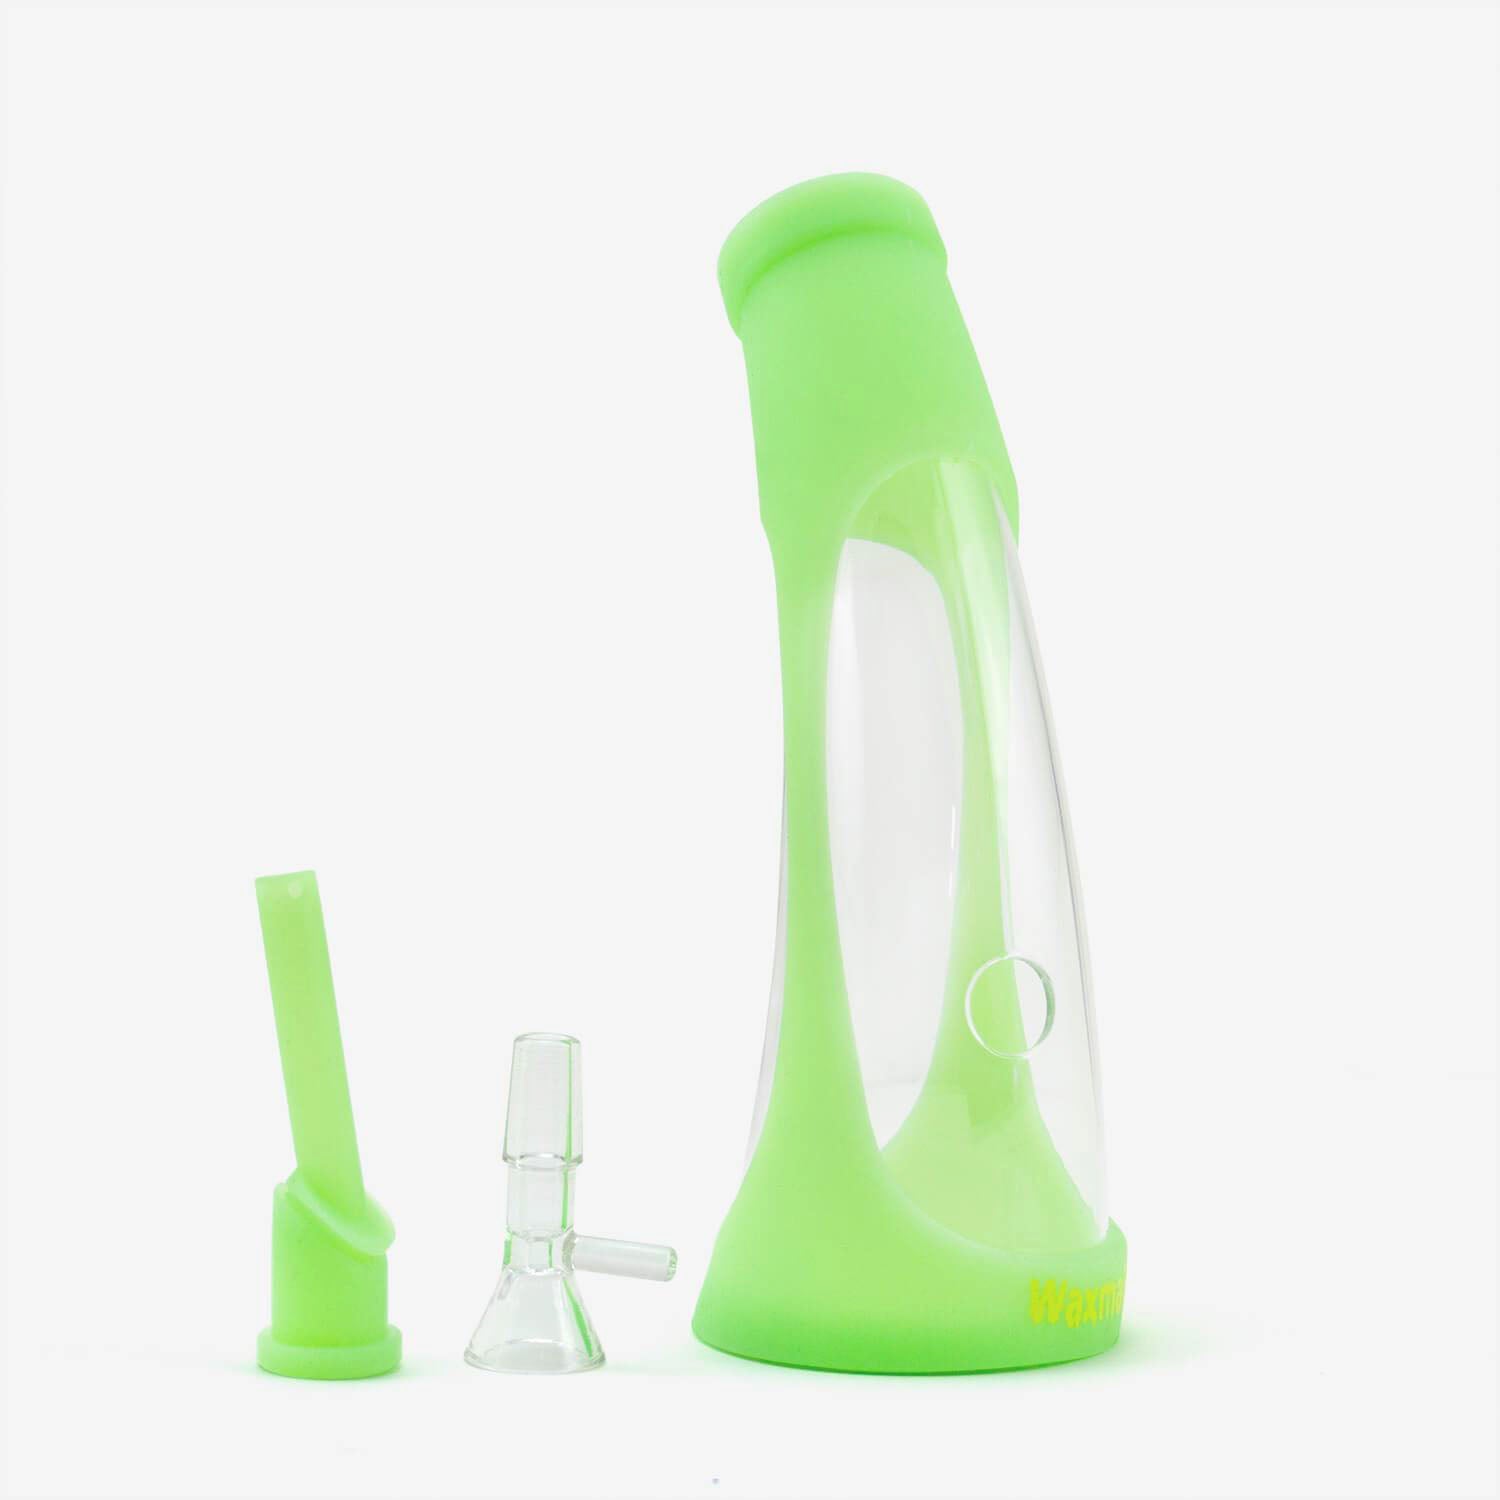 Glow In The Dark Silicone Bong - INHALCO